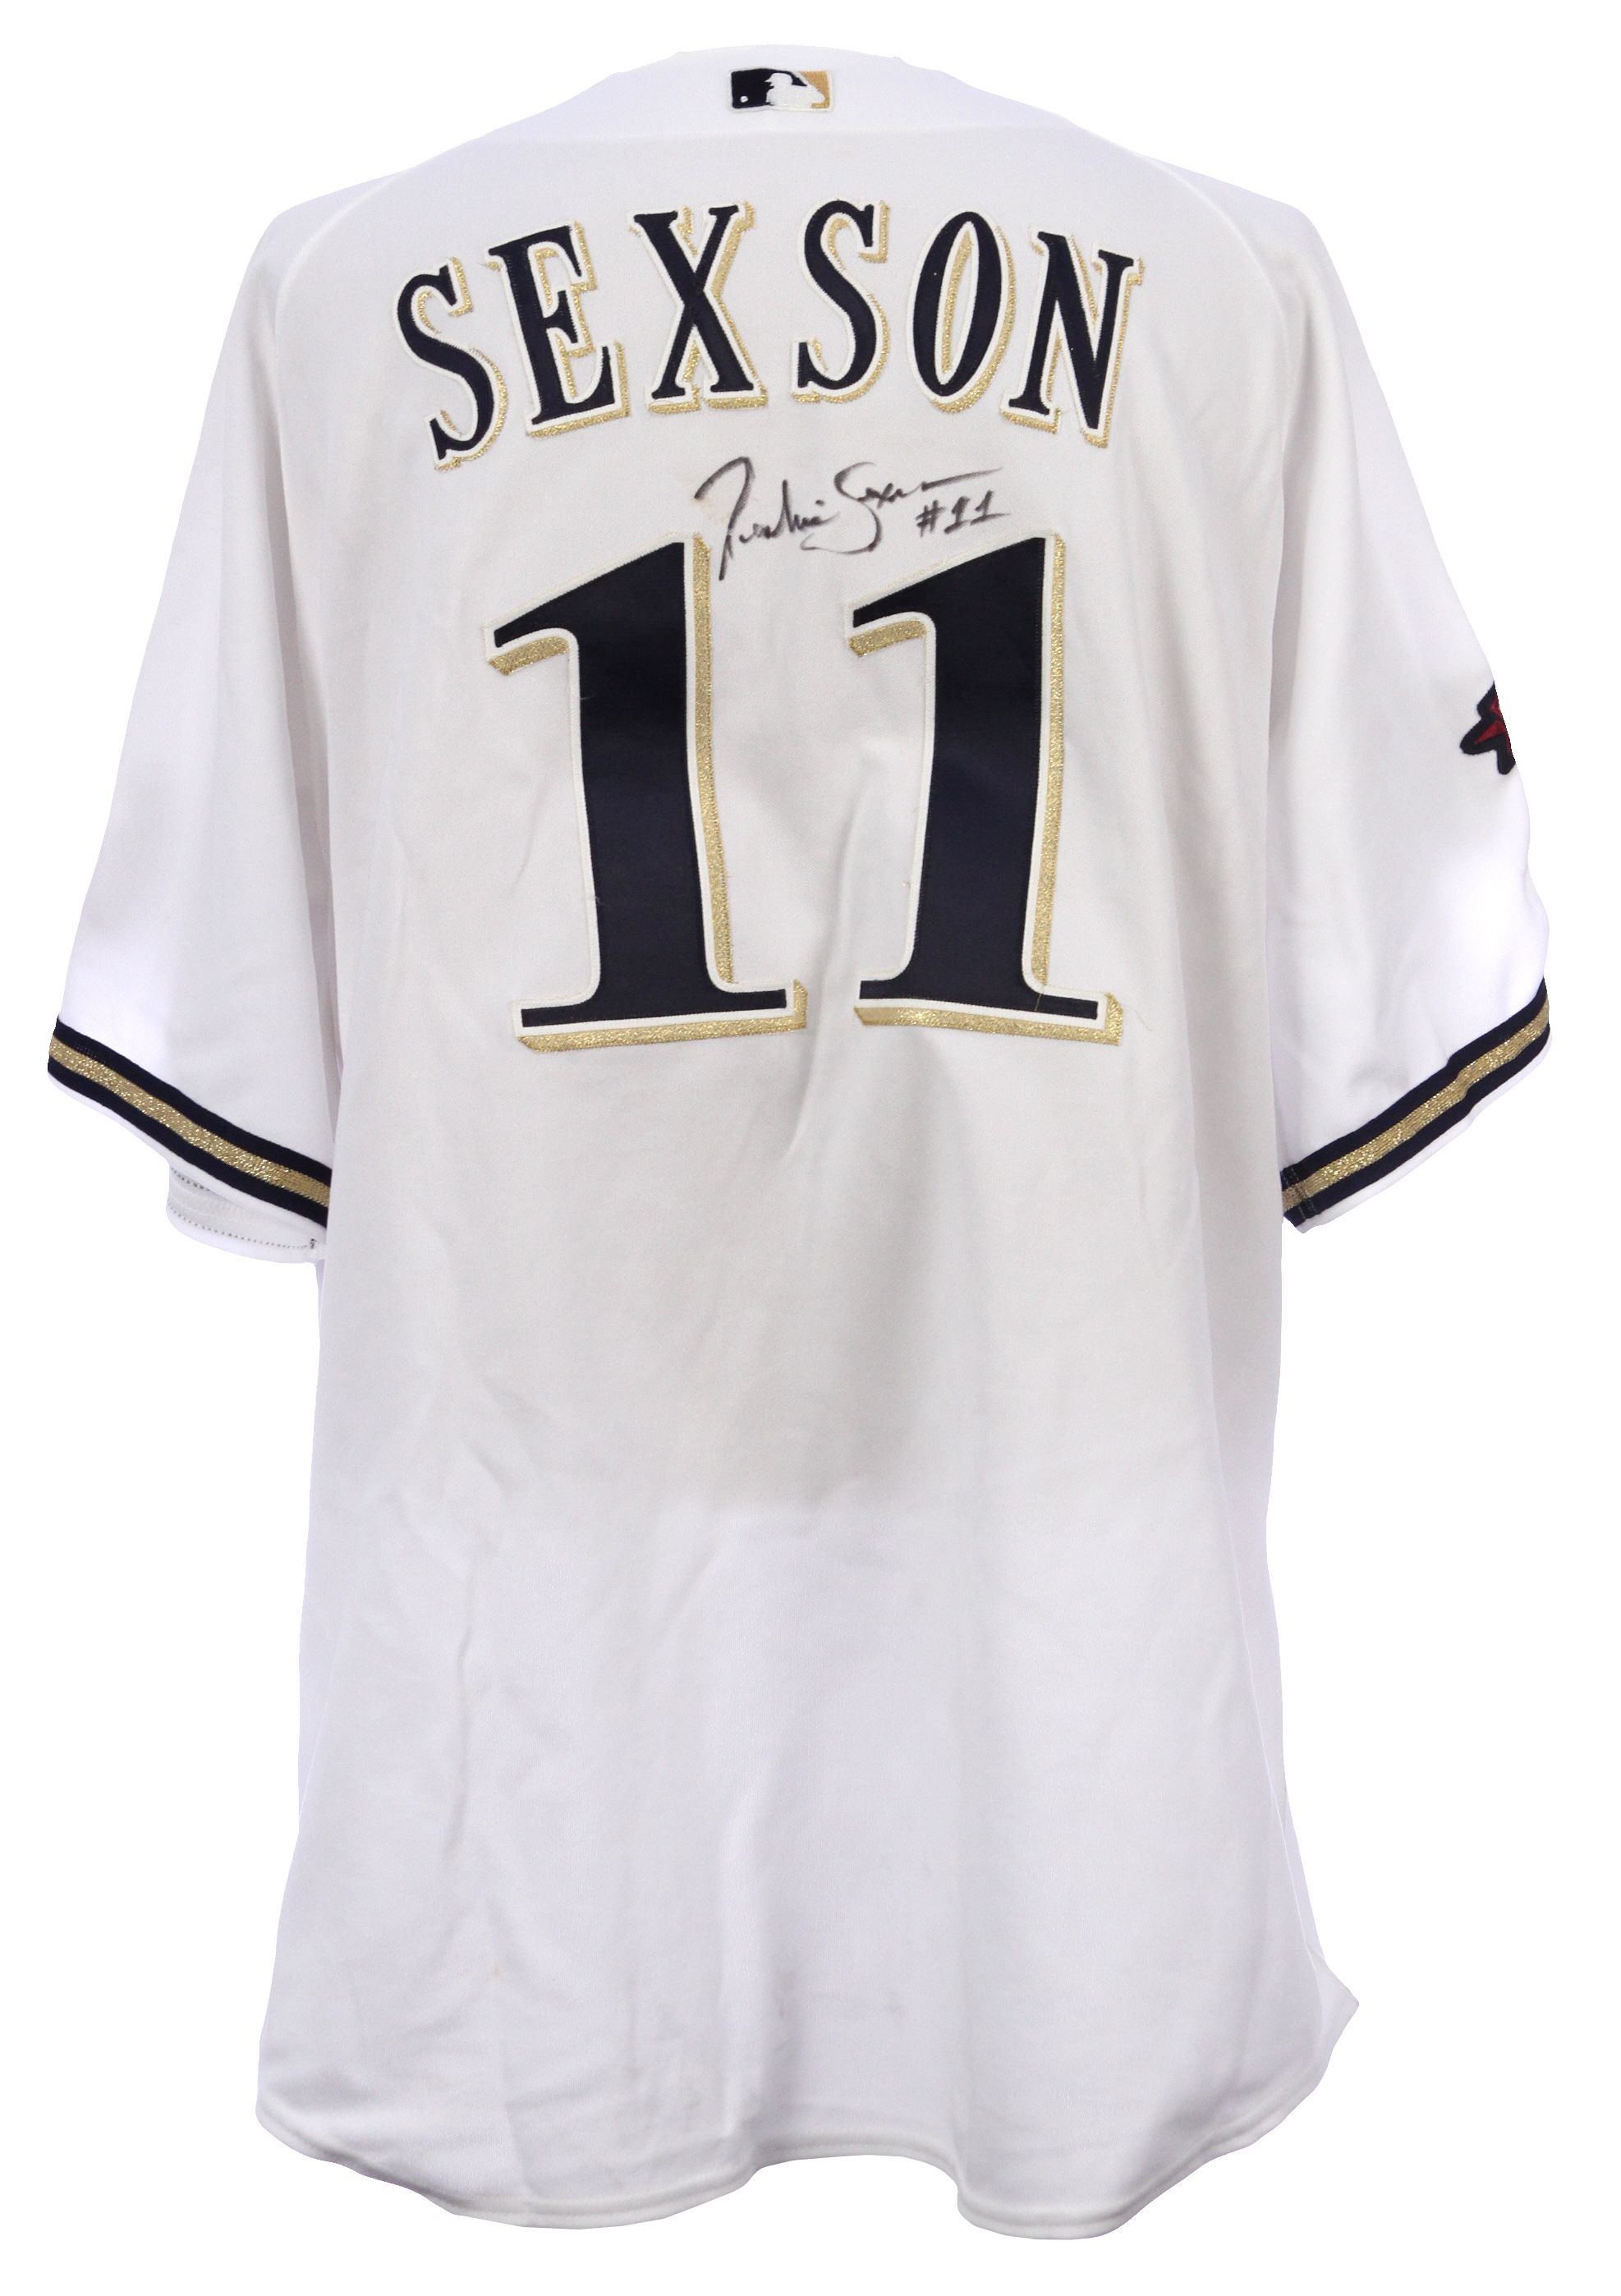 2002 Richie Sexson Game-Worn Brewers Jersey w/ All-Star Patch - Memorabilia  Expert